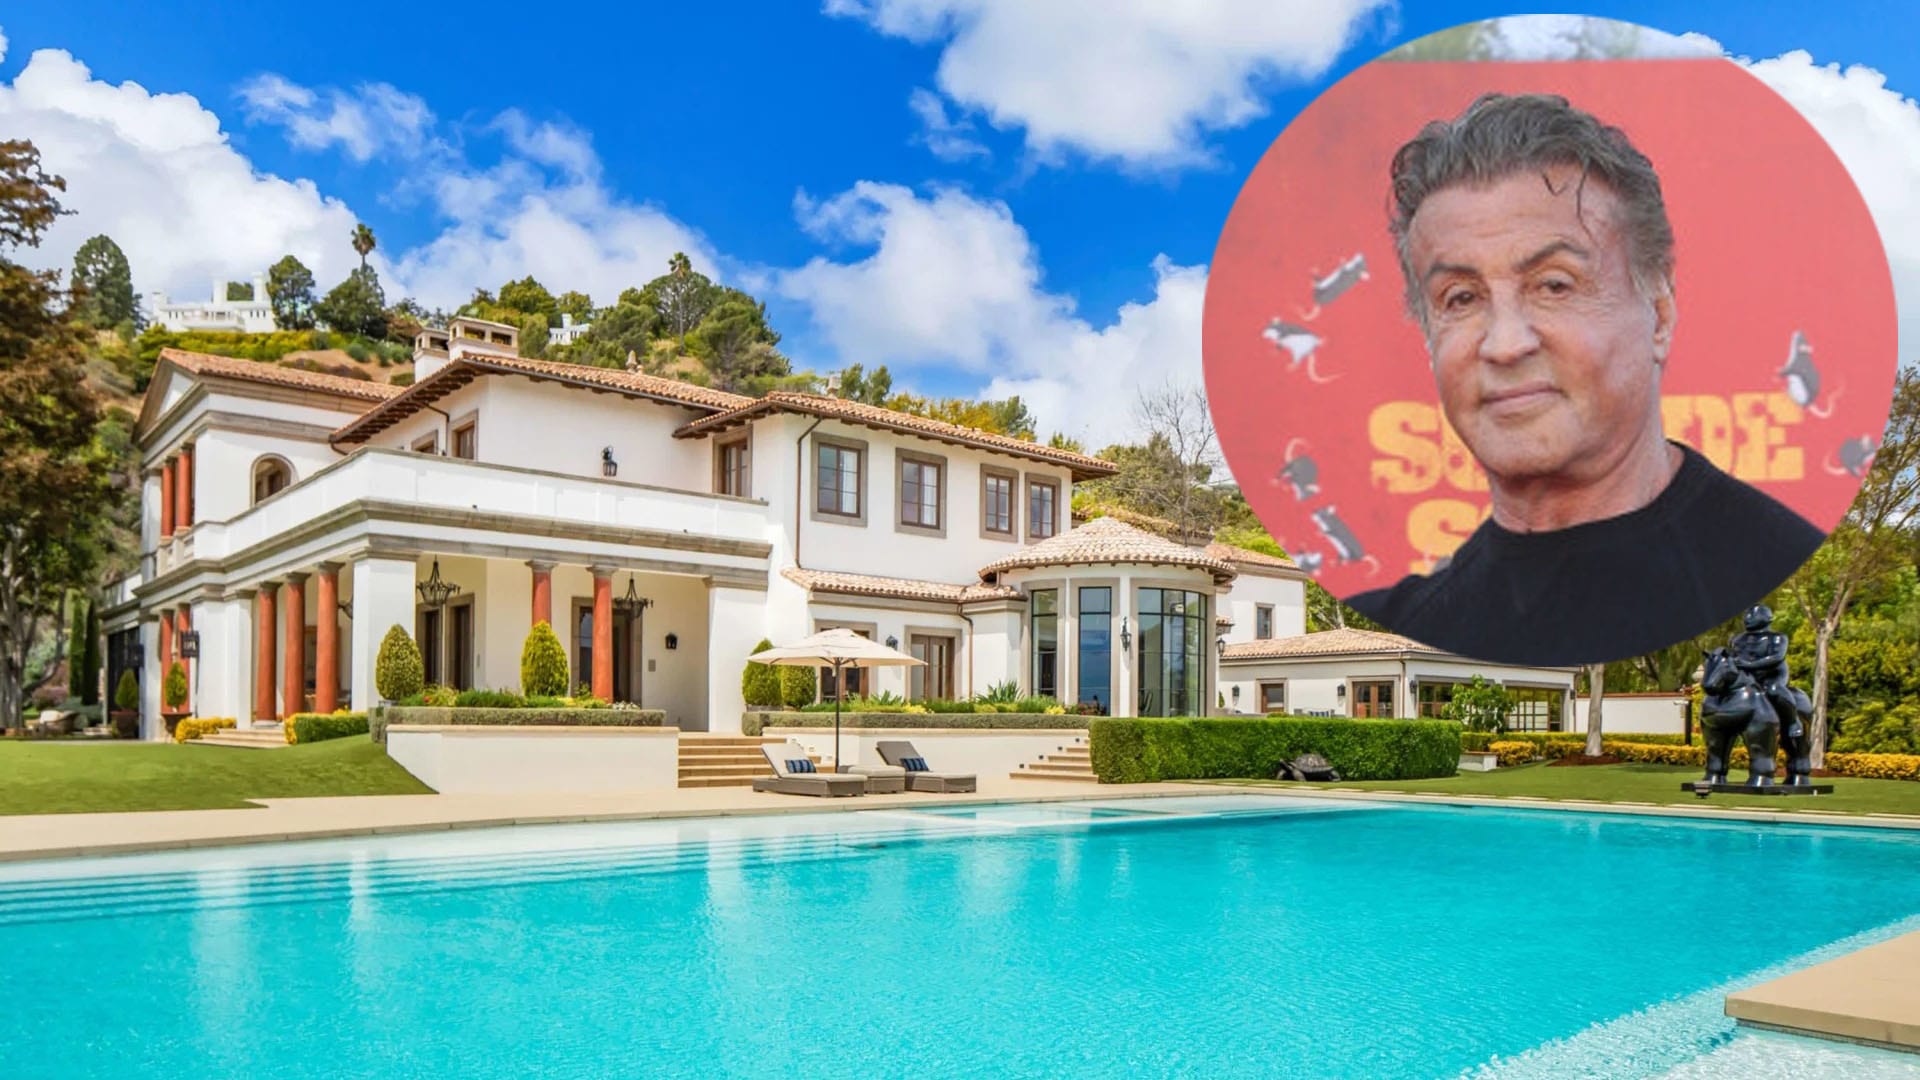 What Does Sylvester Stallone’s Gym Look Like In His Los Angeles Mansion, Which He’s Selling For S$116 Million?